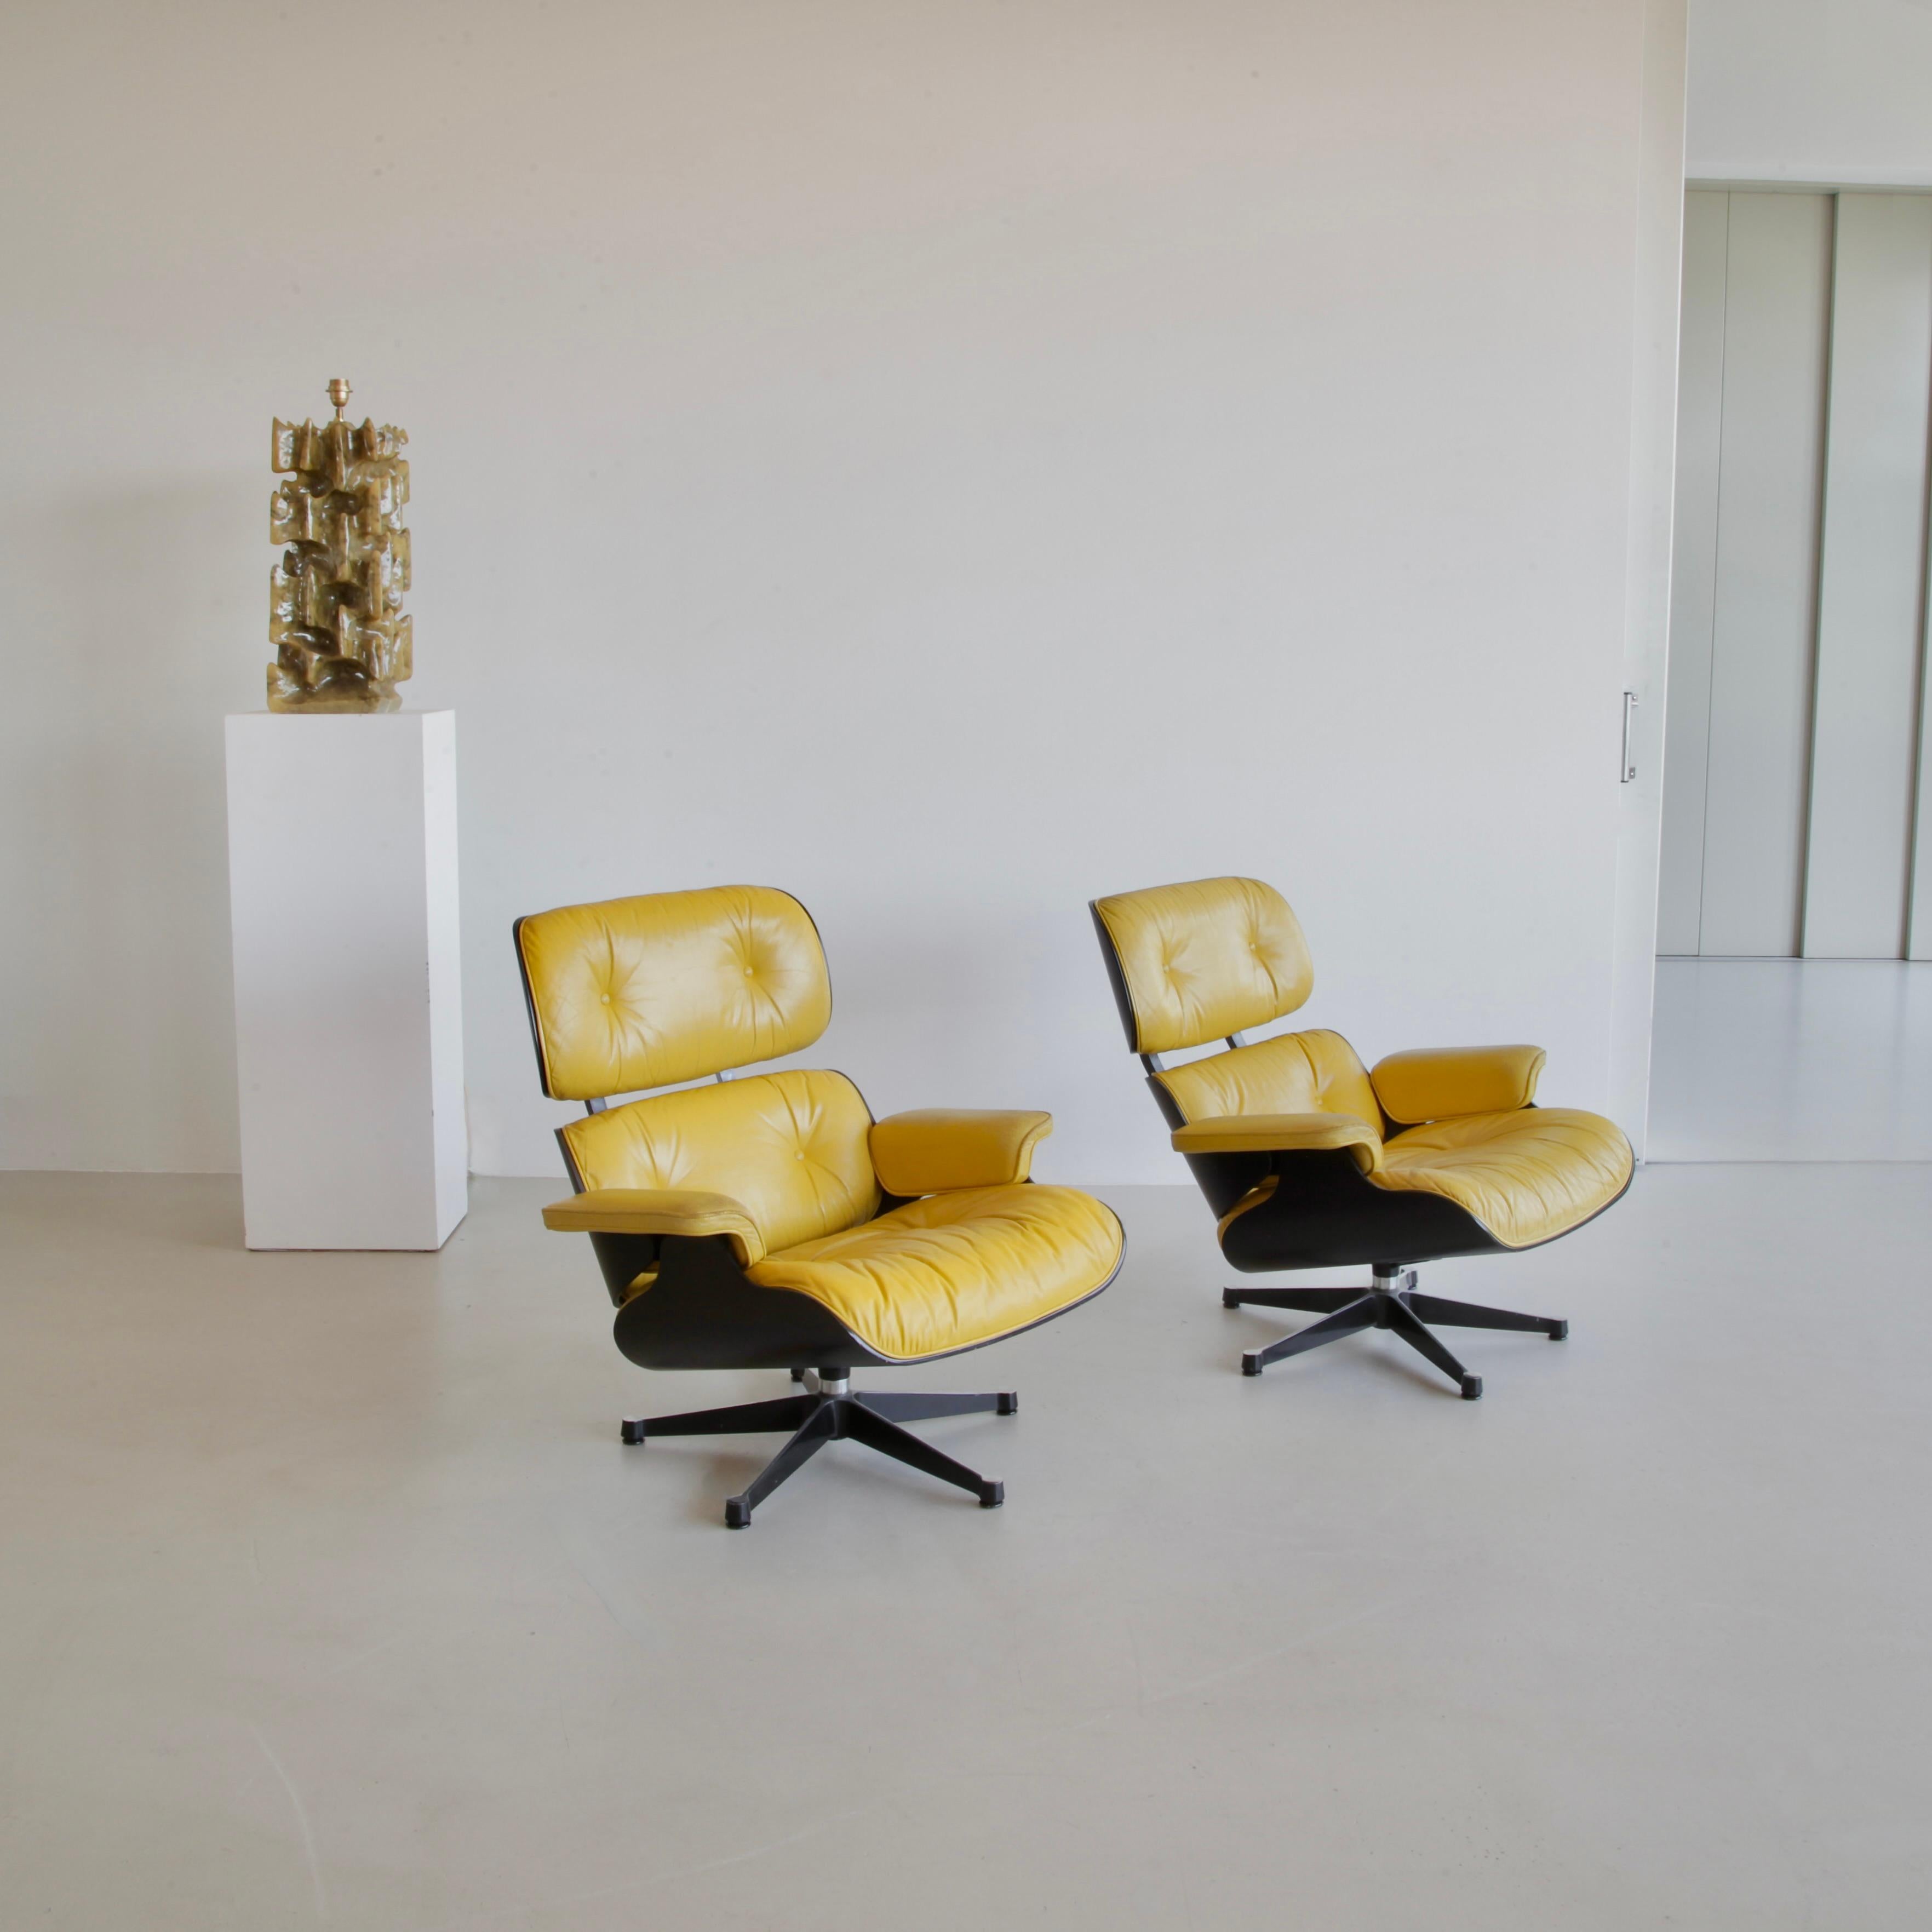 Pair of Lounge Chairs by Charles & Ray Eames, Vitra, 1980s For Sale 1